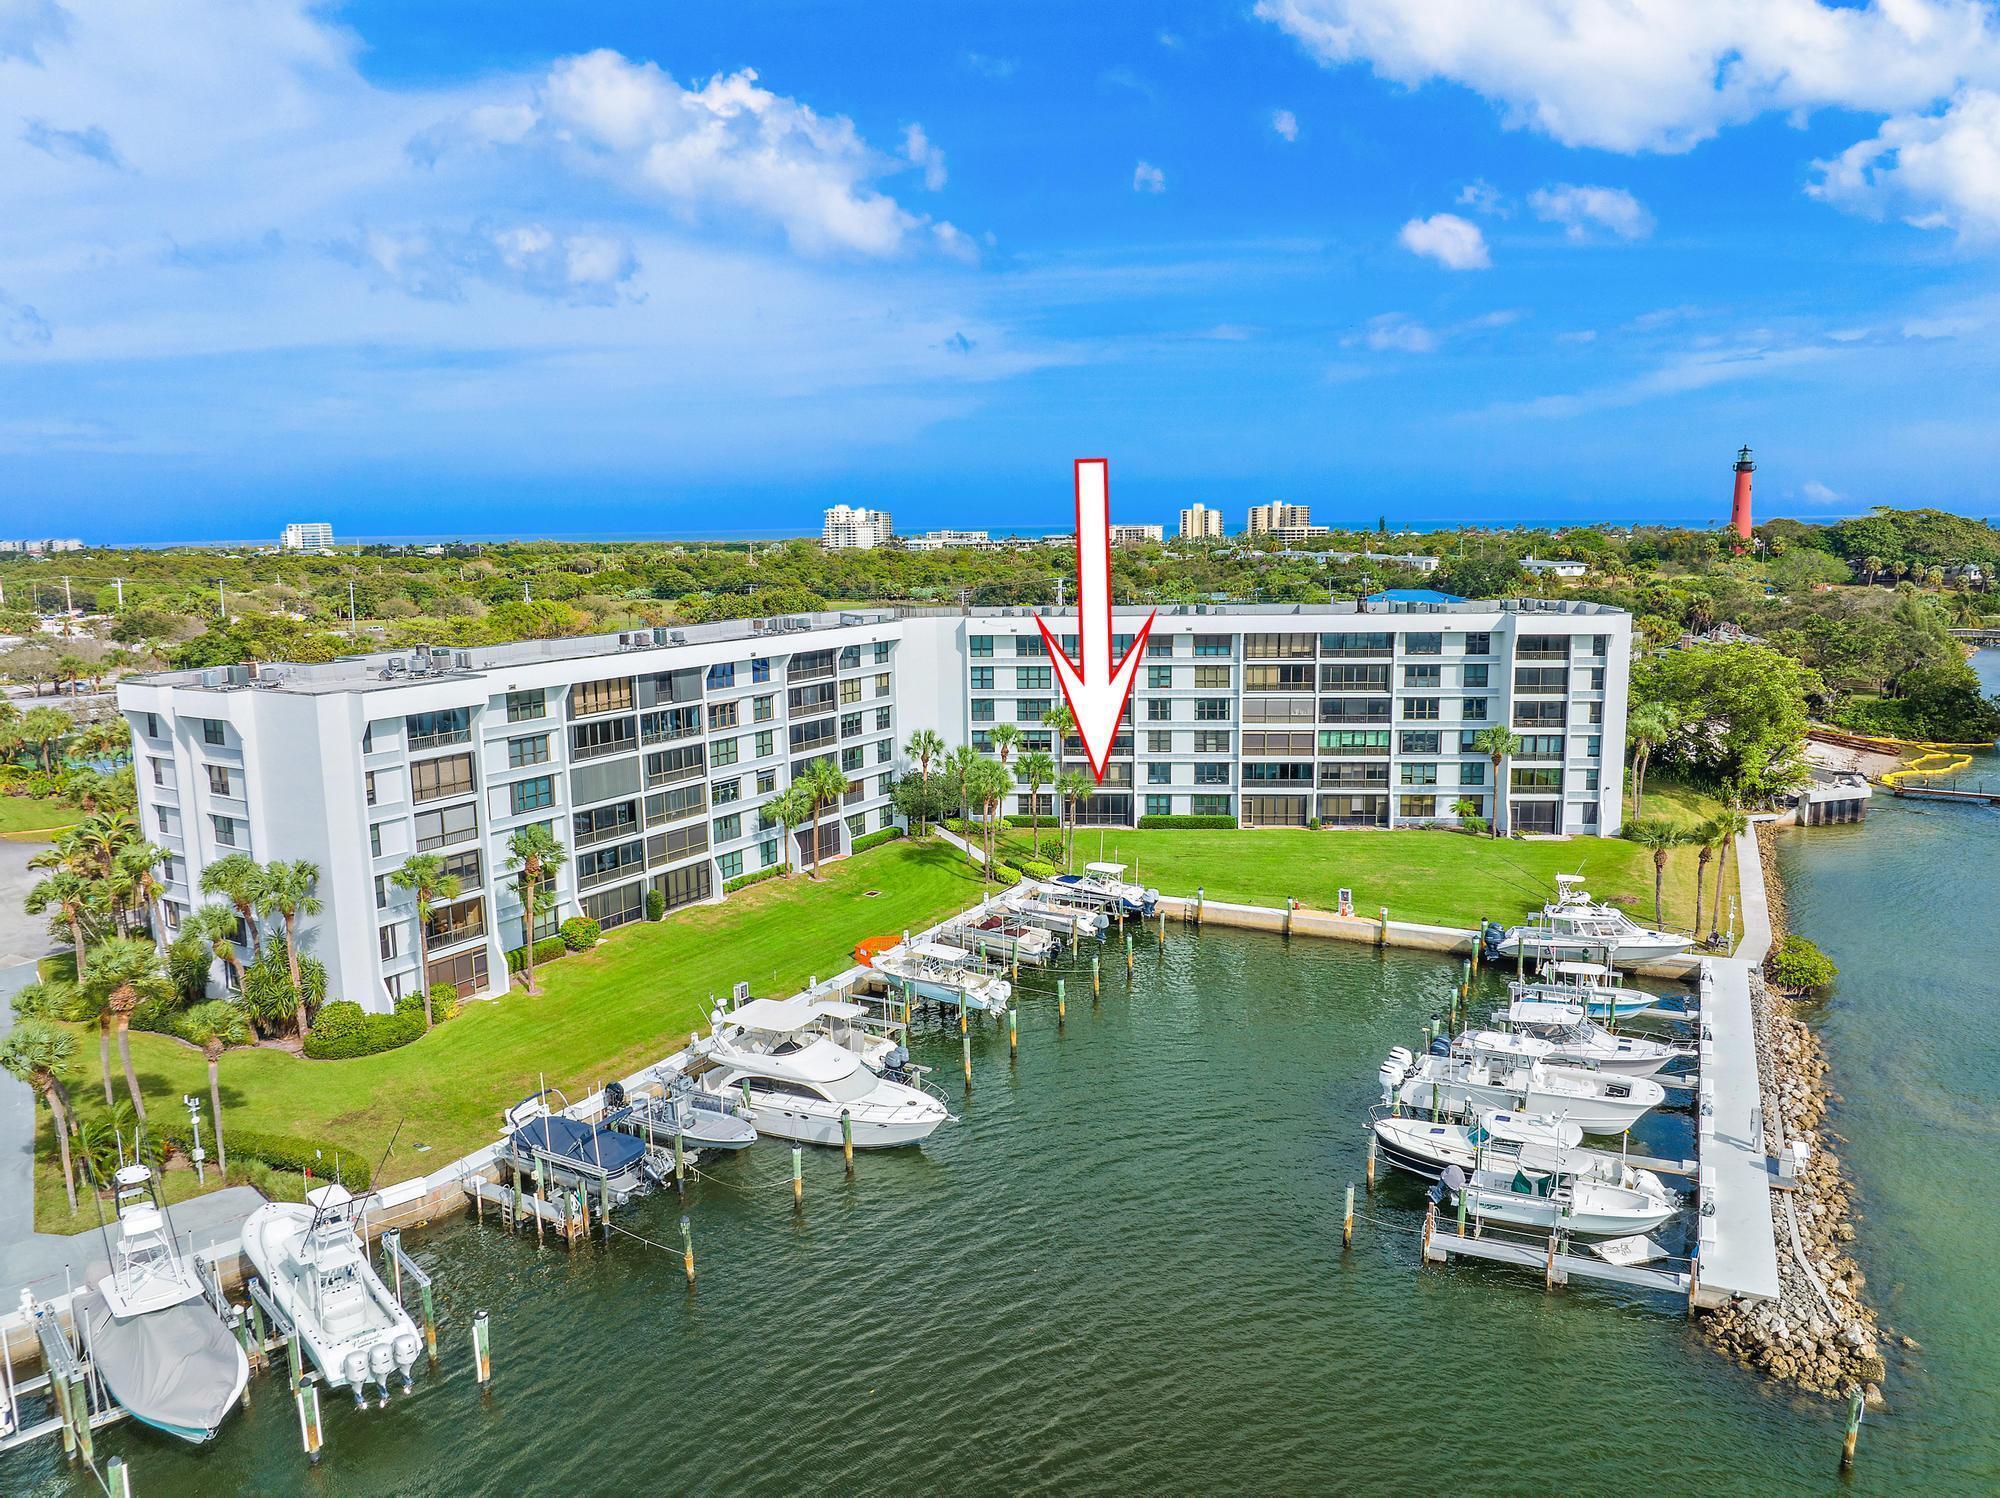 Enjoy amazing views of Jupiter Inlet and the Intracoastal from your new waterfront home in Jupiter Cove, where the Loxahatchee River, Jupiter Inlet and Intracoastal all converge offering easy access to the Atlantic Ocean. Step out the back door to your private marina, or simply relax and enjoy sunset views from your porch. Ground floor unit updated with beachy neutral colors, Luxury Vinyl Plank flooring, and brand new appliances. New A/C and Water Heater in 2022..Jupiter Cove offers a marina with up to 40' boat slips available for rent or purchase when available, tennis, Pickleball, gated security, onsite management, kayak storage, a clubhouse and swimming pool. Check out the waterfront Tiki Bar with grilling and a private beach perfect for wading to the sandbar. Jupiter Cove, located in the heart of Jupiter, is close to Tequesta, the beach, world class golf courses, US1, A1A, dining, shopping, and everything that makes Jupiter one of the most sought after towns in South Florida.